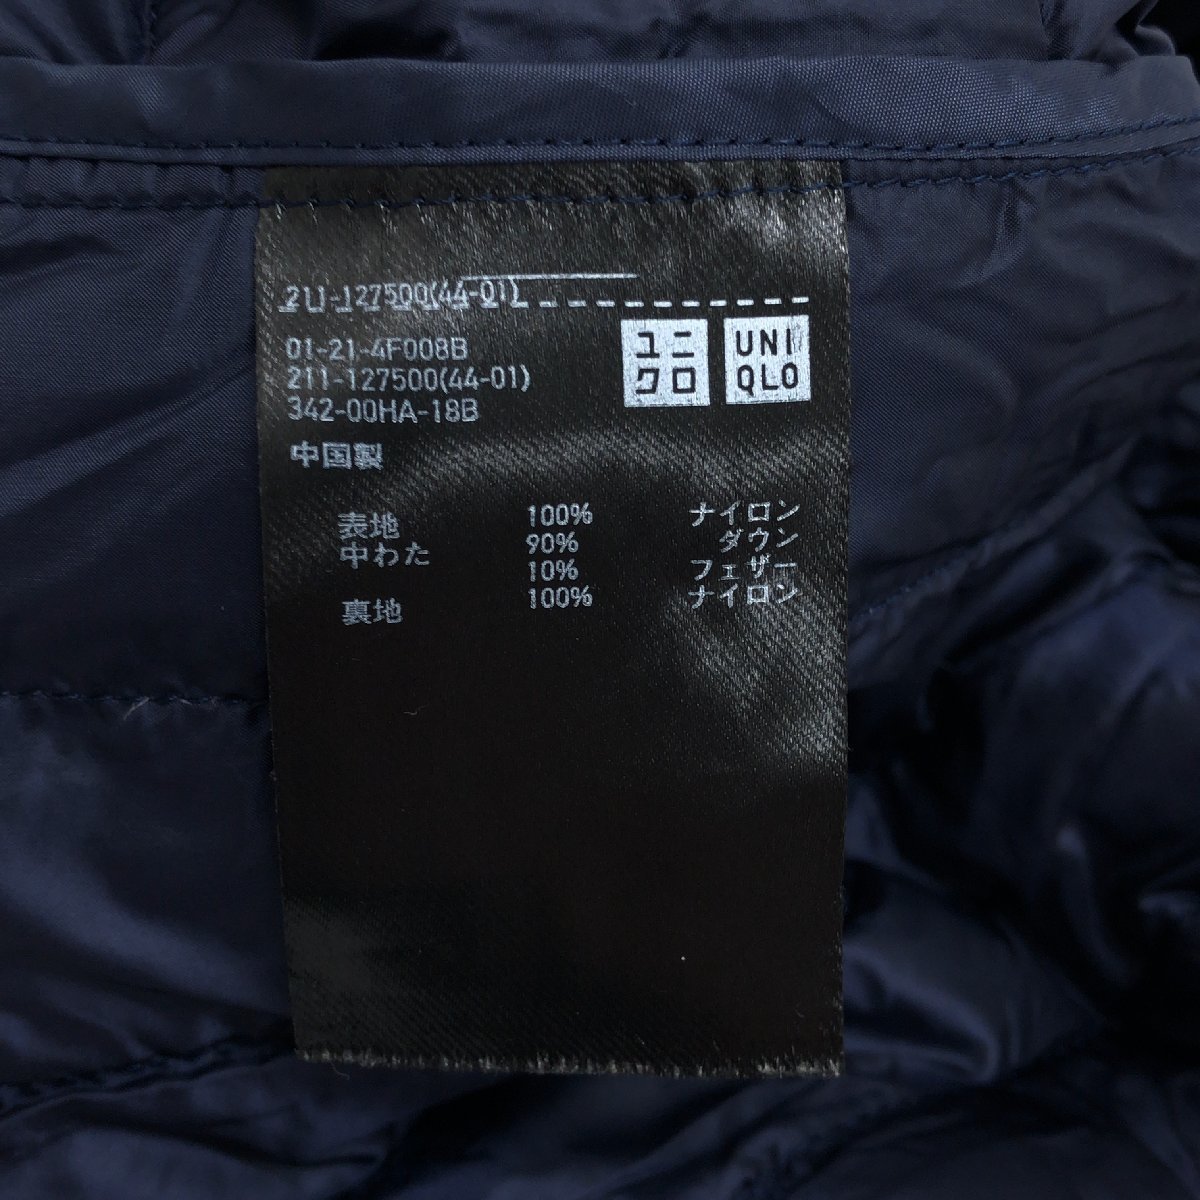 *UNIQLO Uniqlo Ultra light down vest S navy blue navy outer light weight compact inner down storage sack attaching lady's for women 